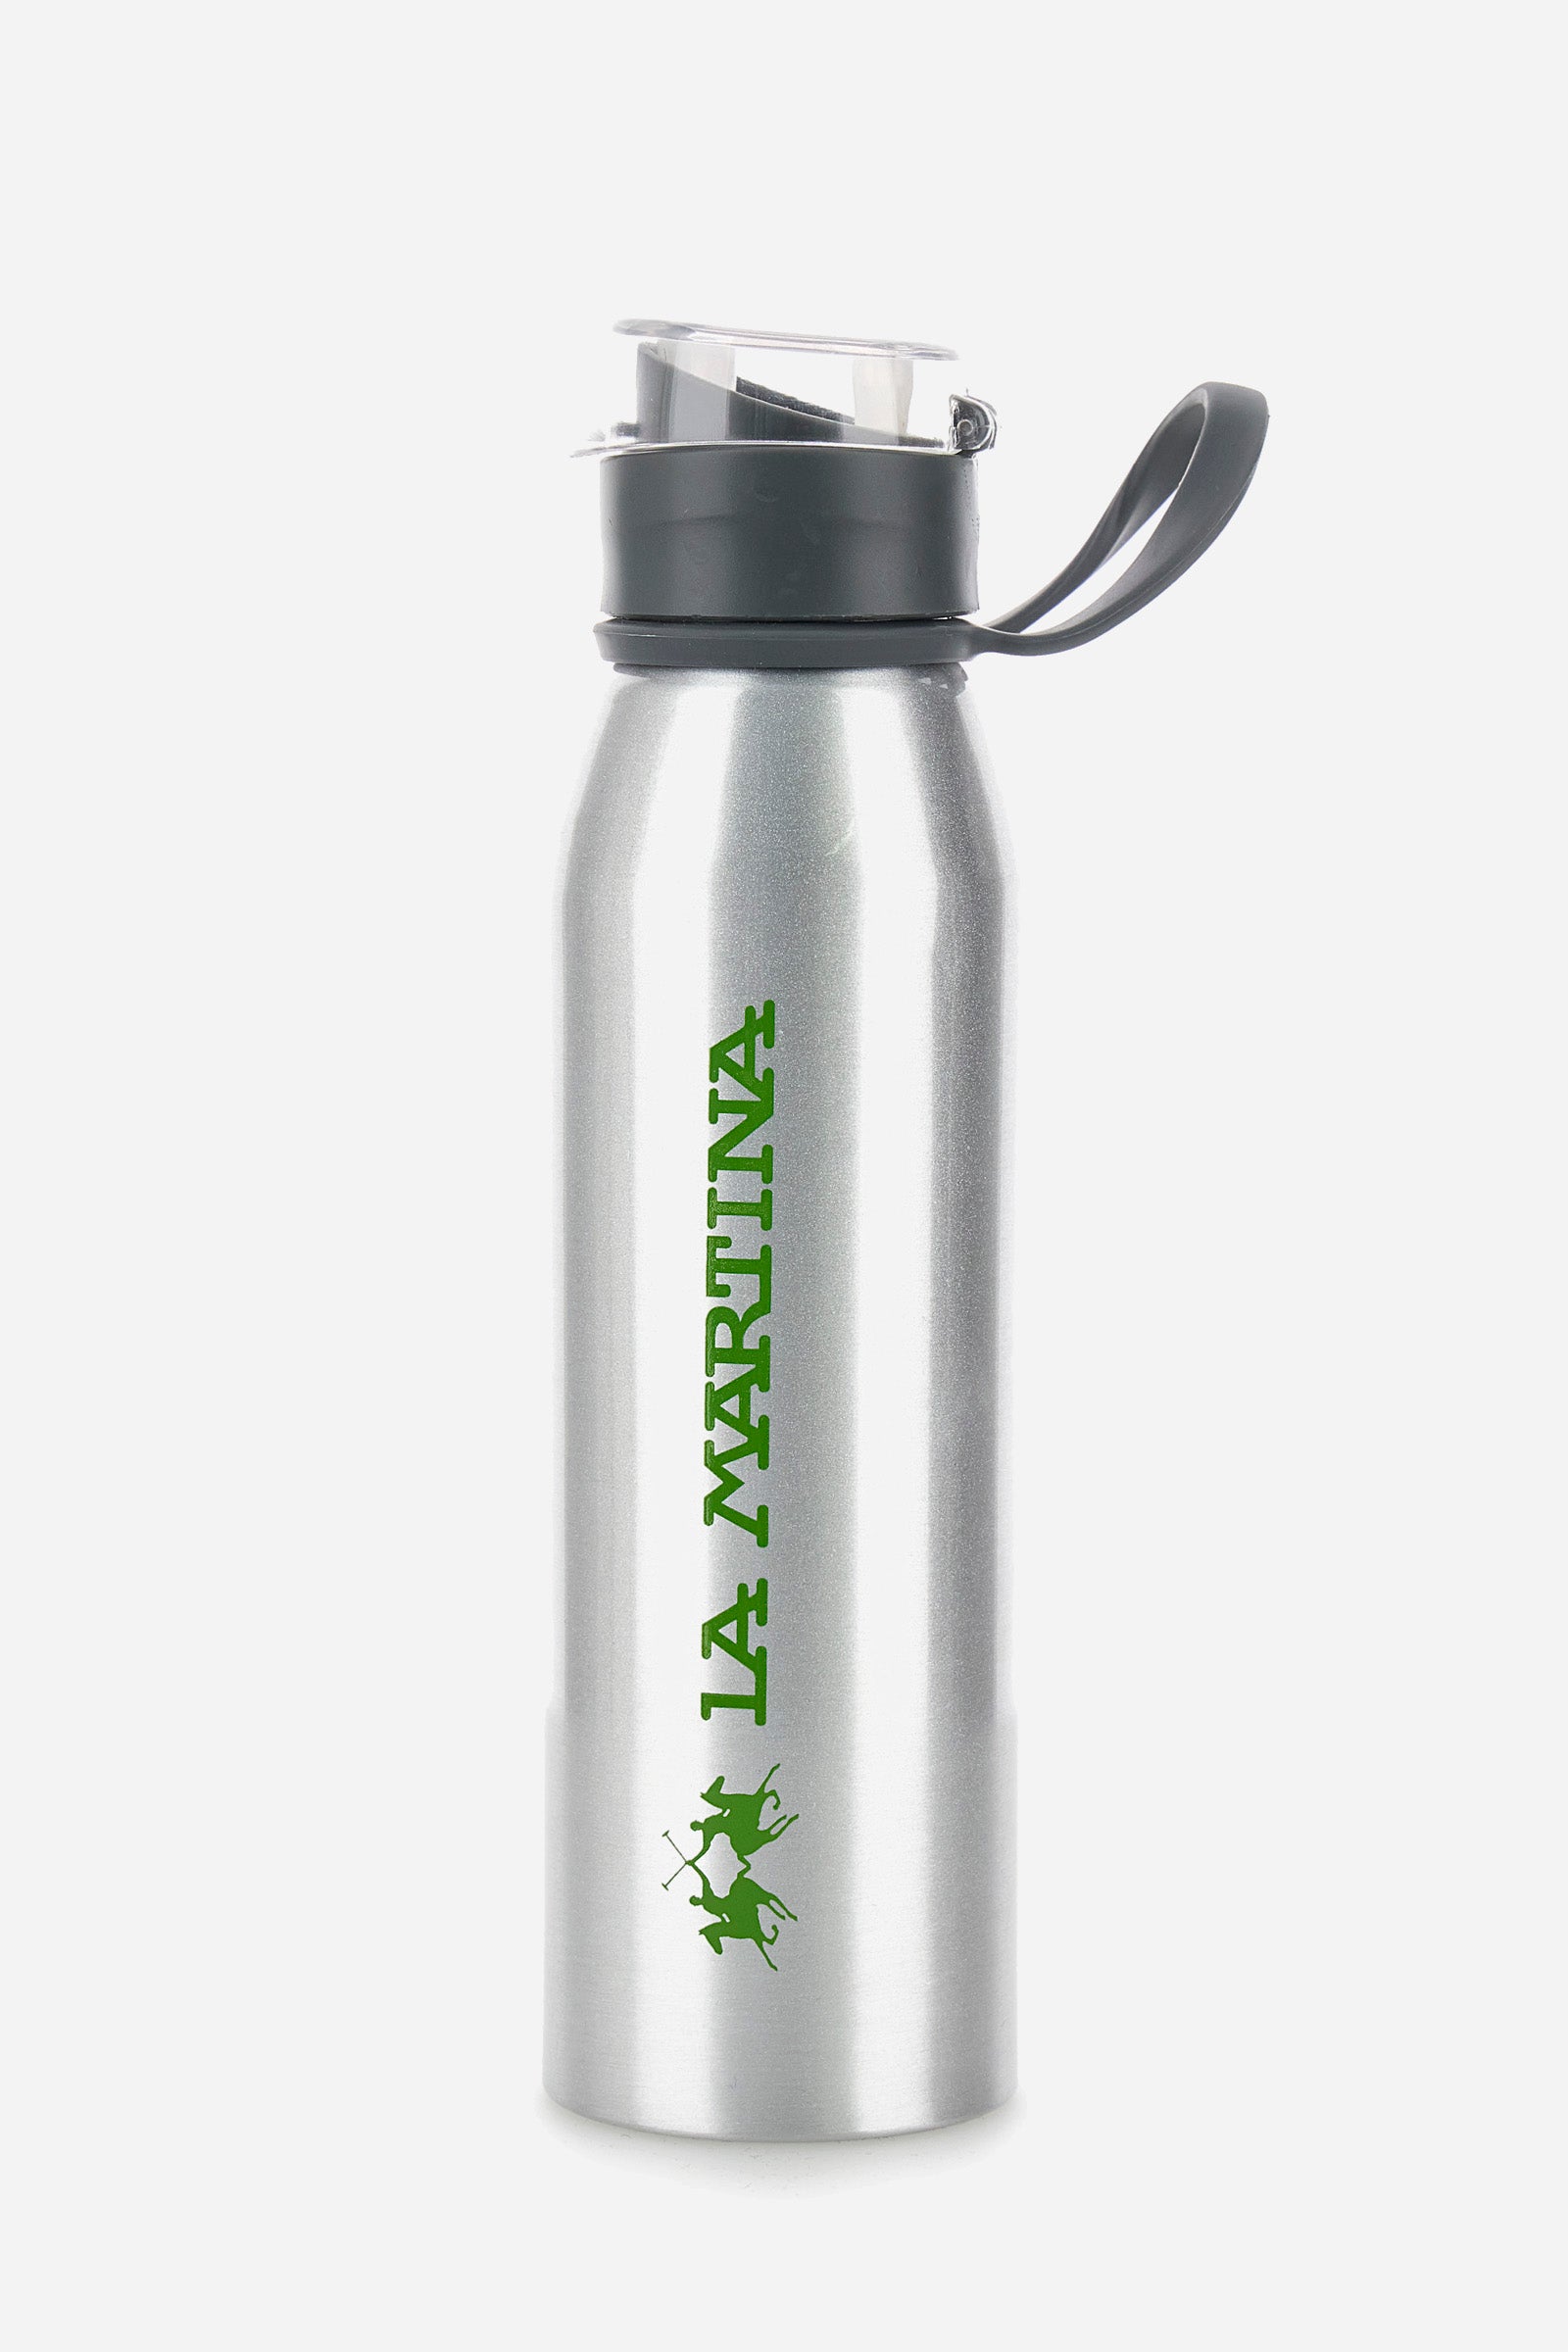 Unisex aluminium bottle with a watertight lid and logo